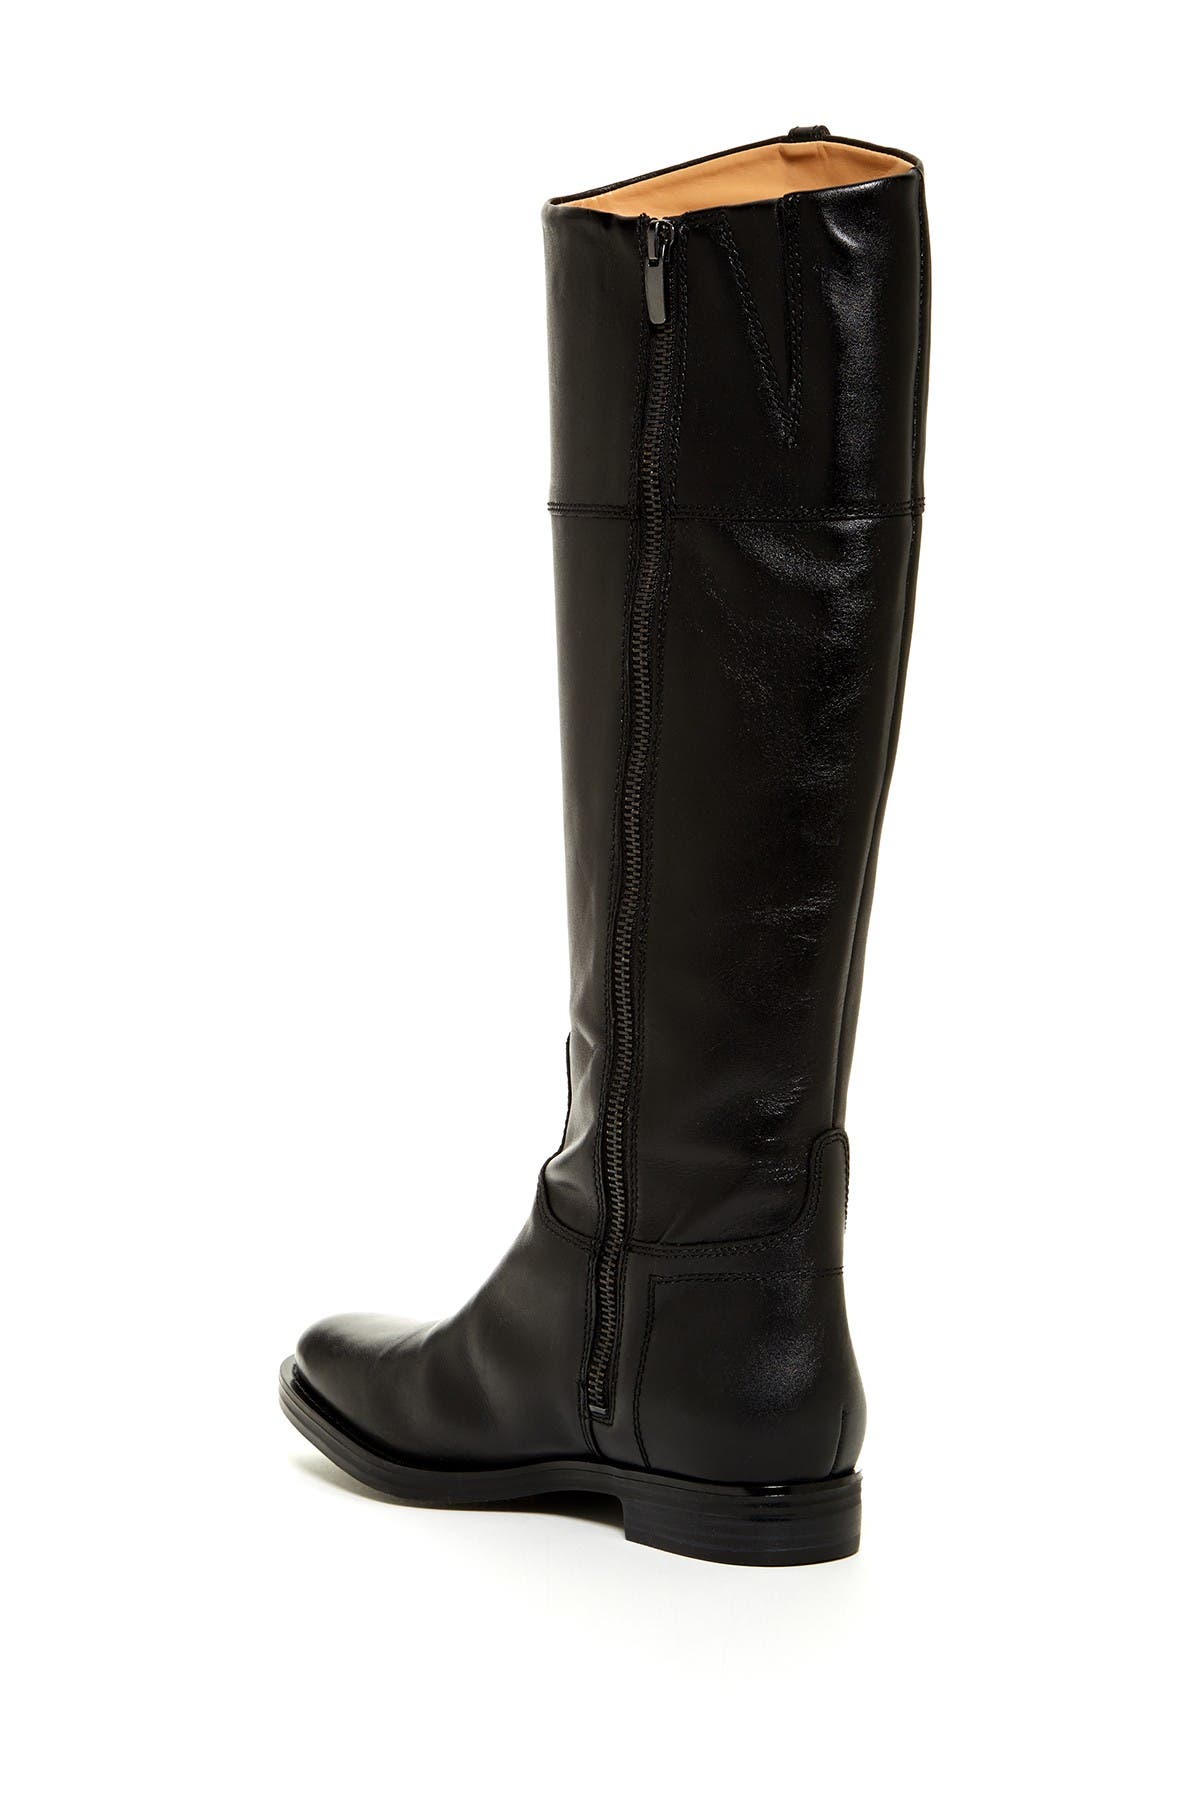 Enzo Angiolini | Ellerby Riding Boot 